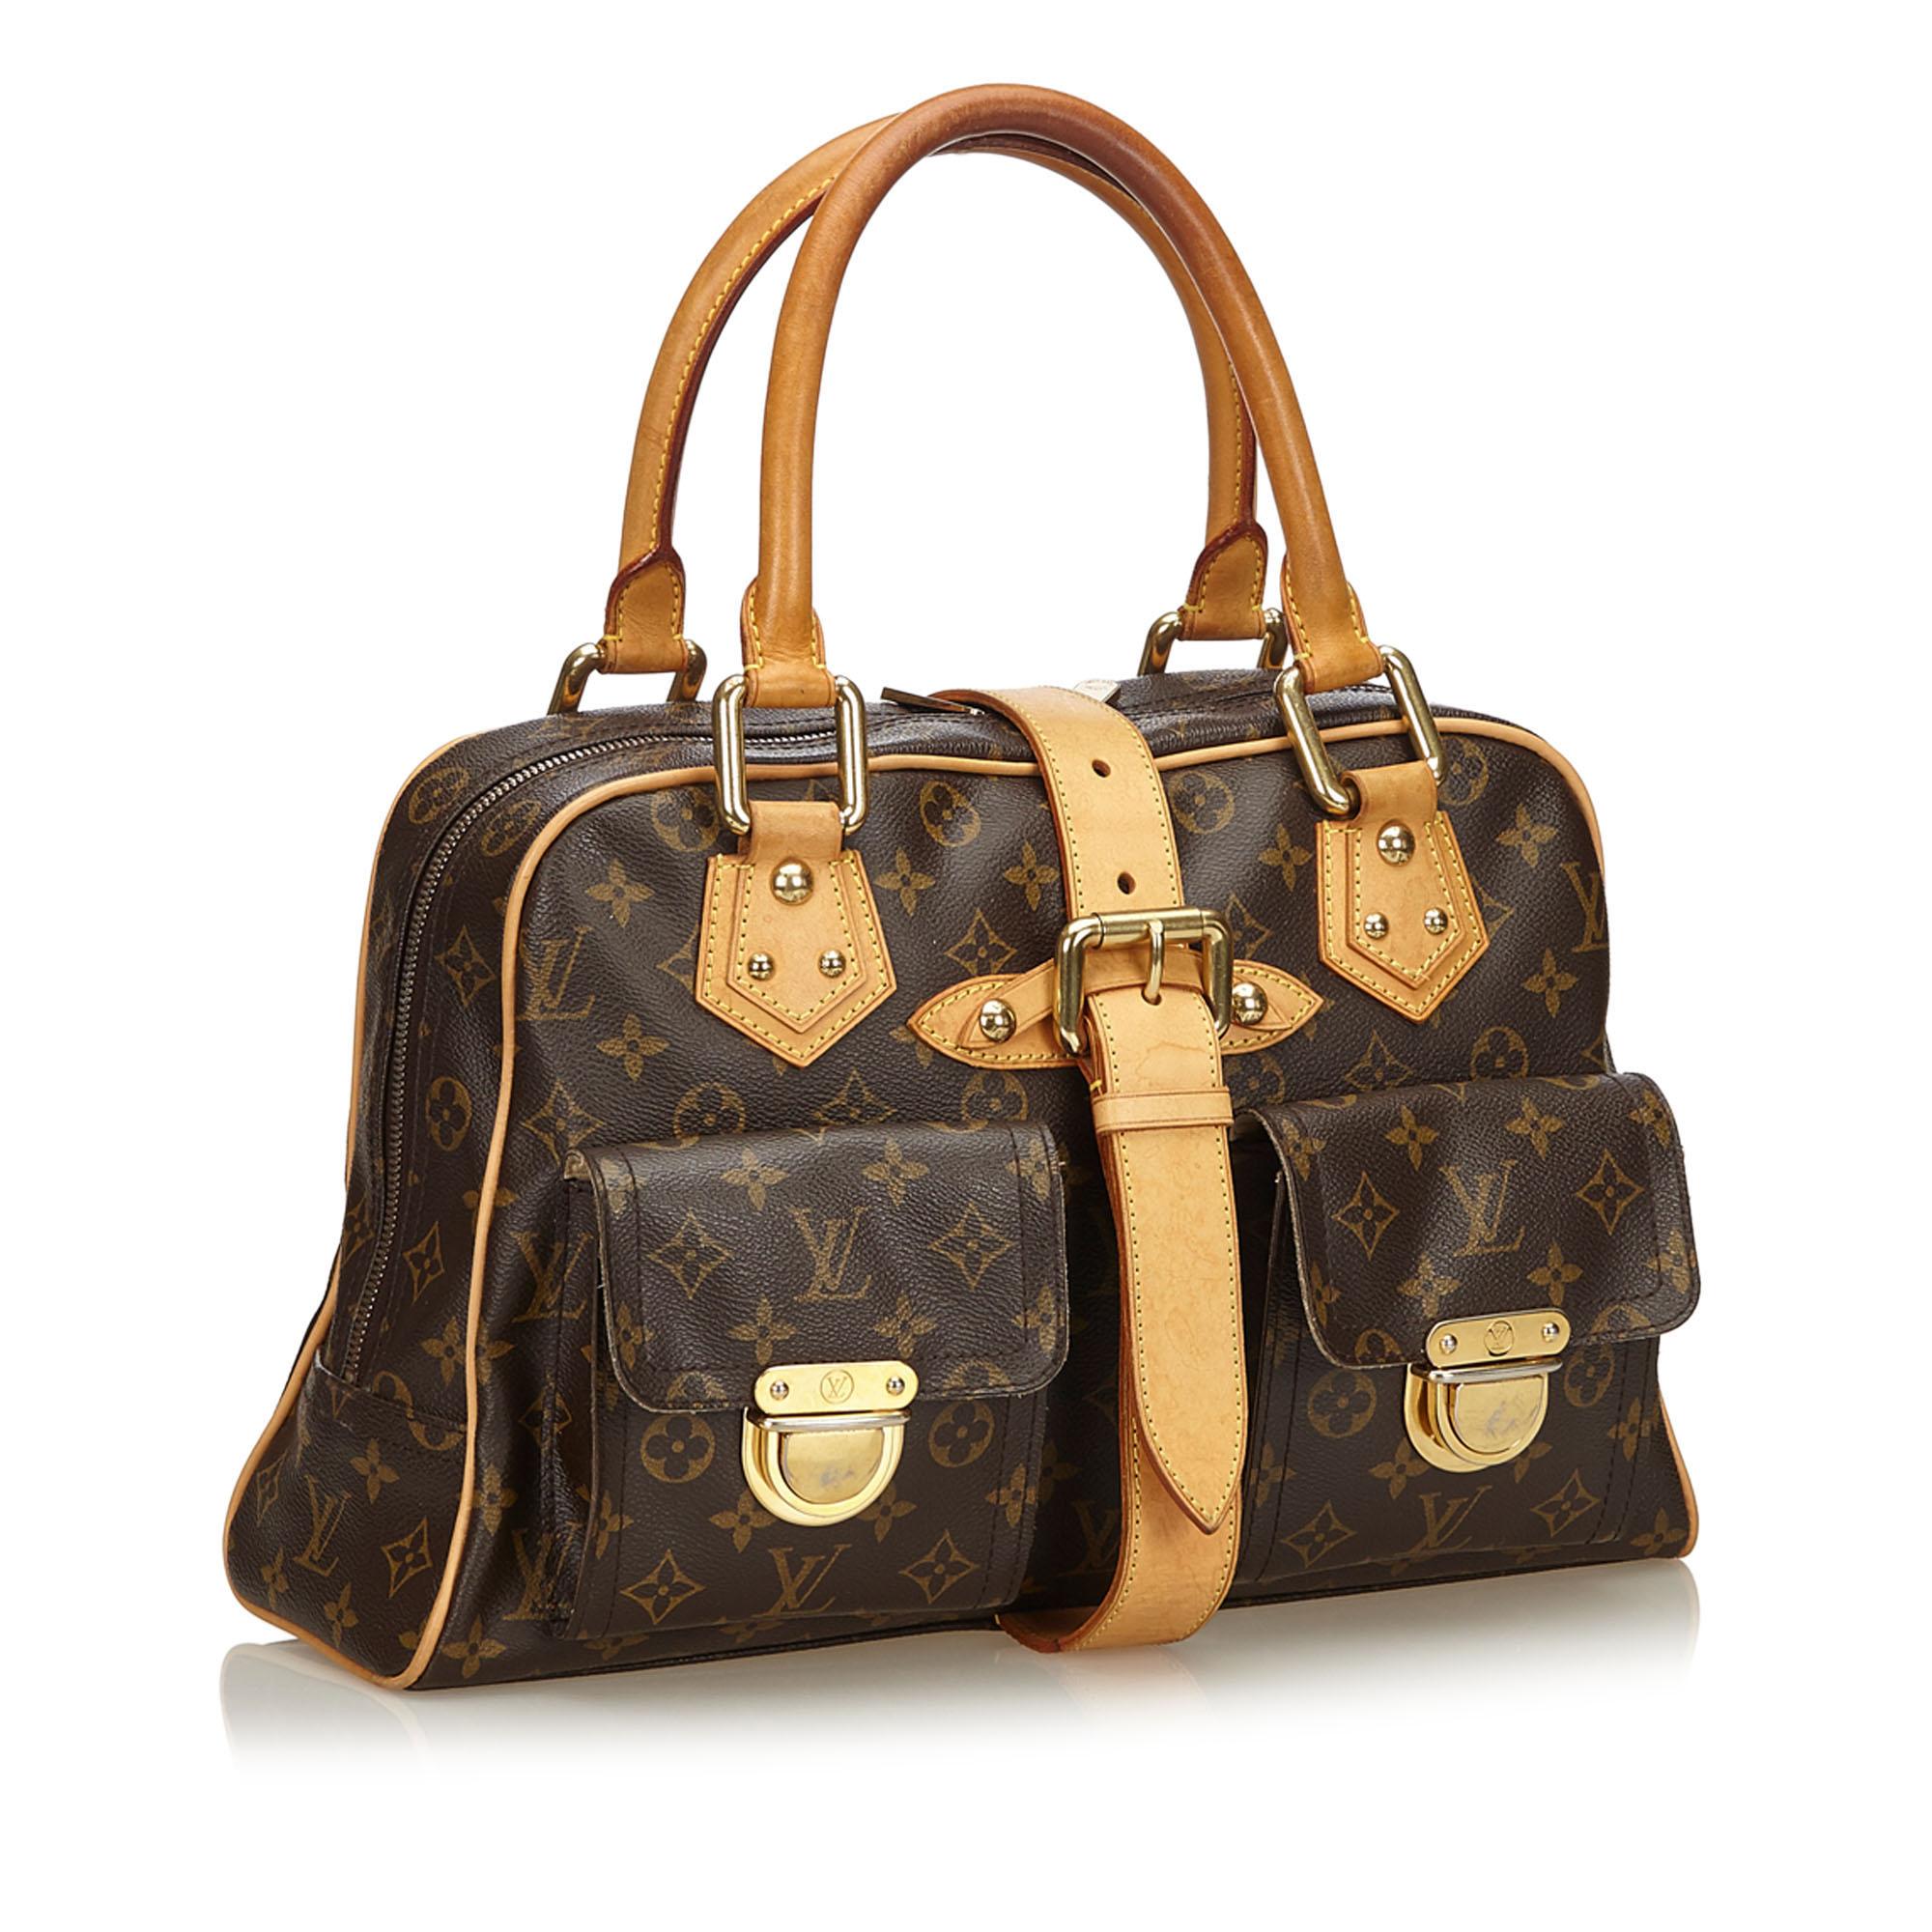 The Manhattan GM features a monogram canvas body, rolled leather handles, exterior flap pockets with gold-tone hardware and push lock closures, a top strap with a belt buckle detail, a top zip closure, and an interior slip pocket.

It carries a B